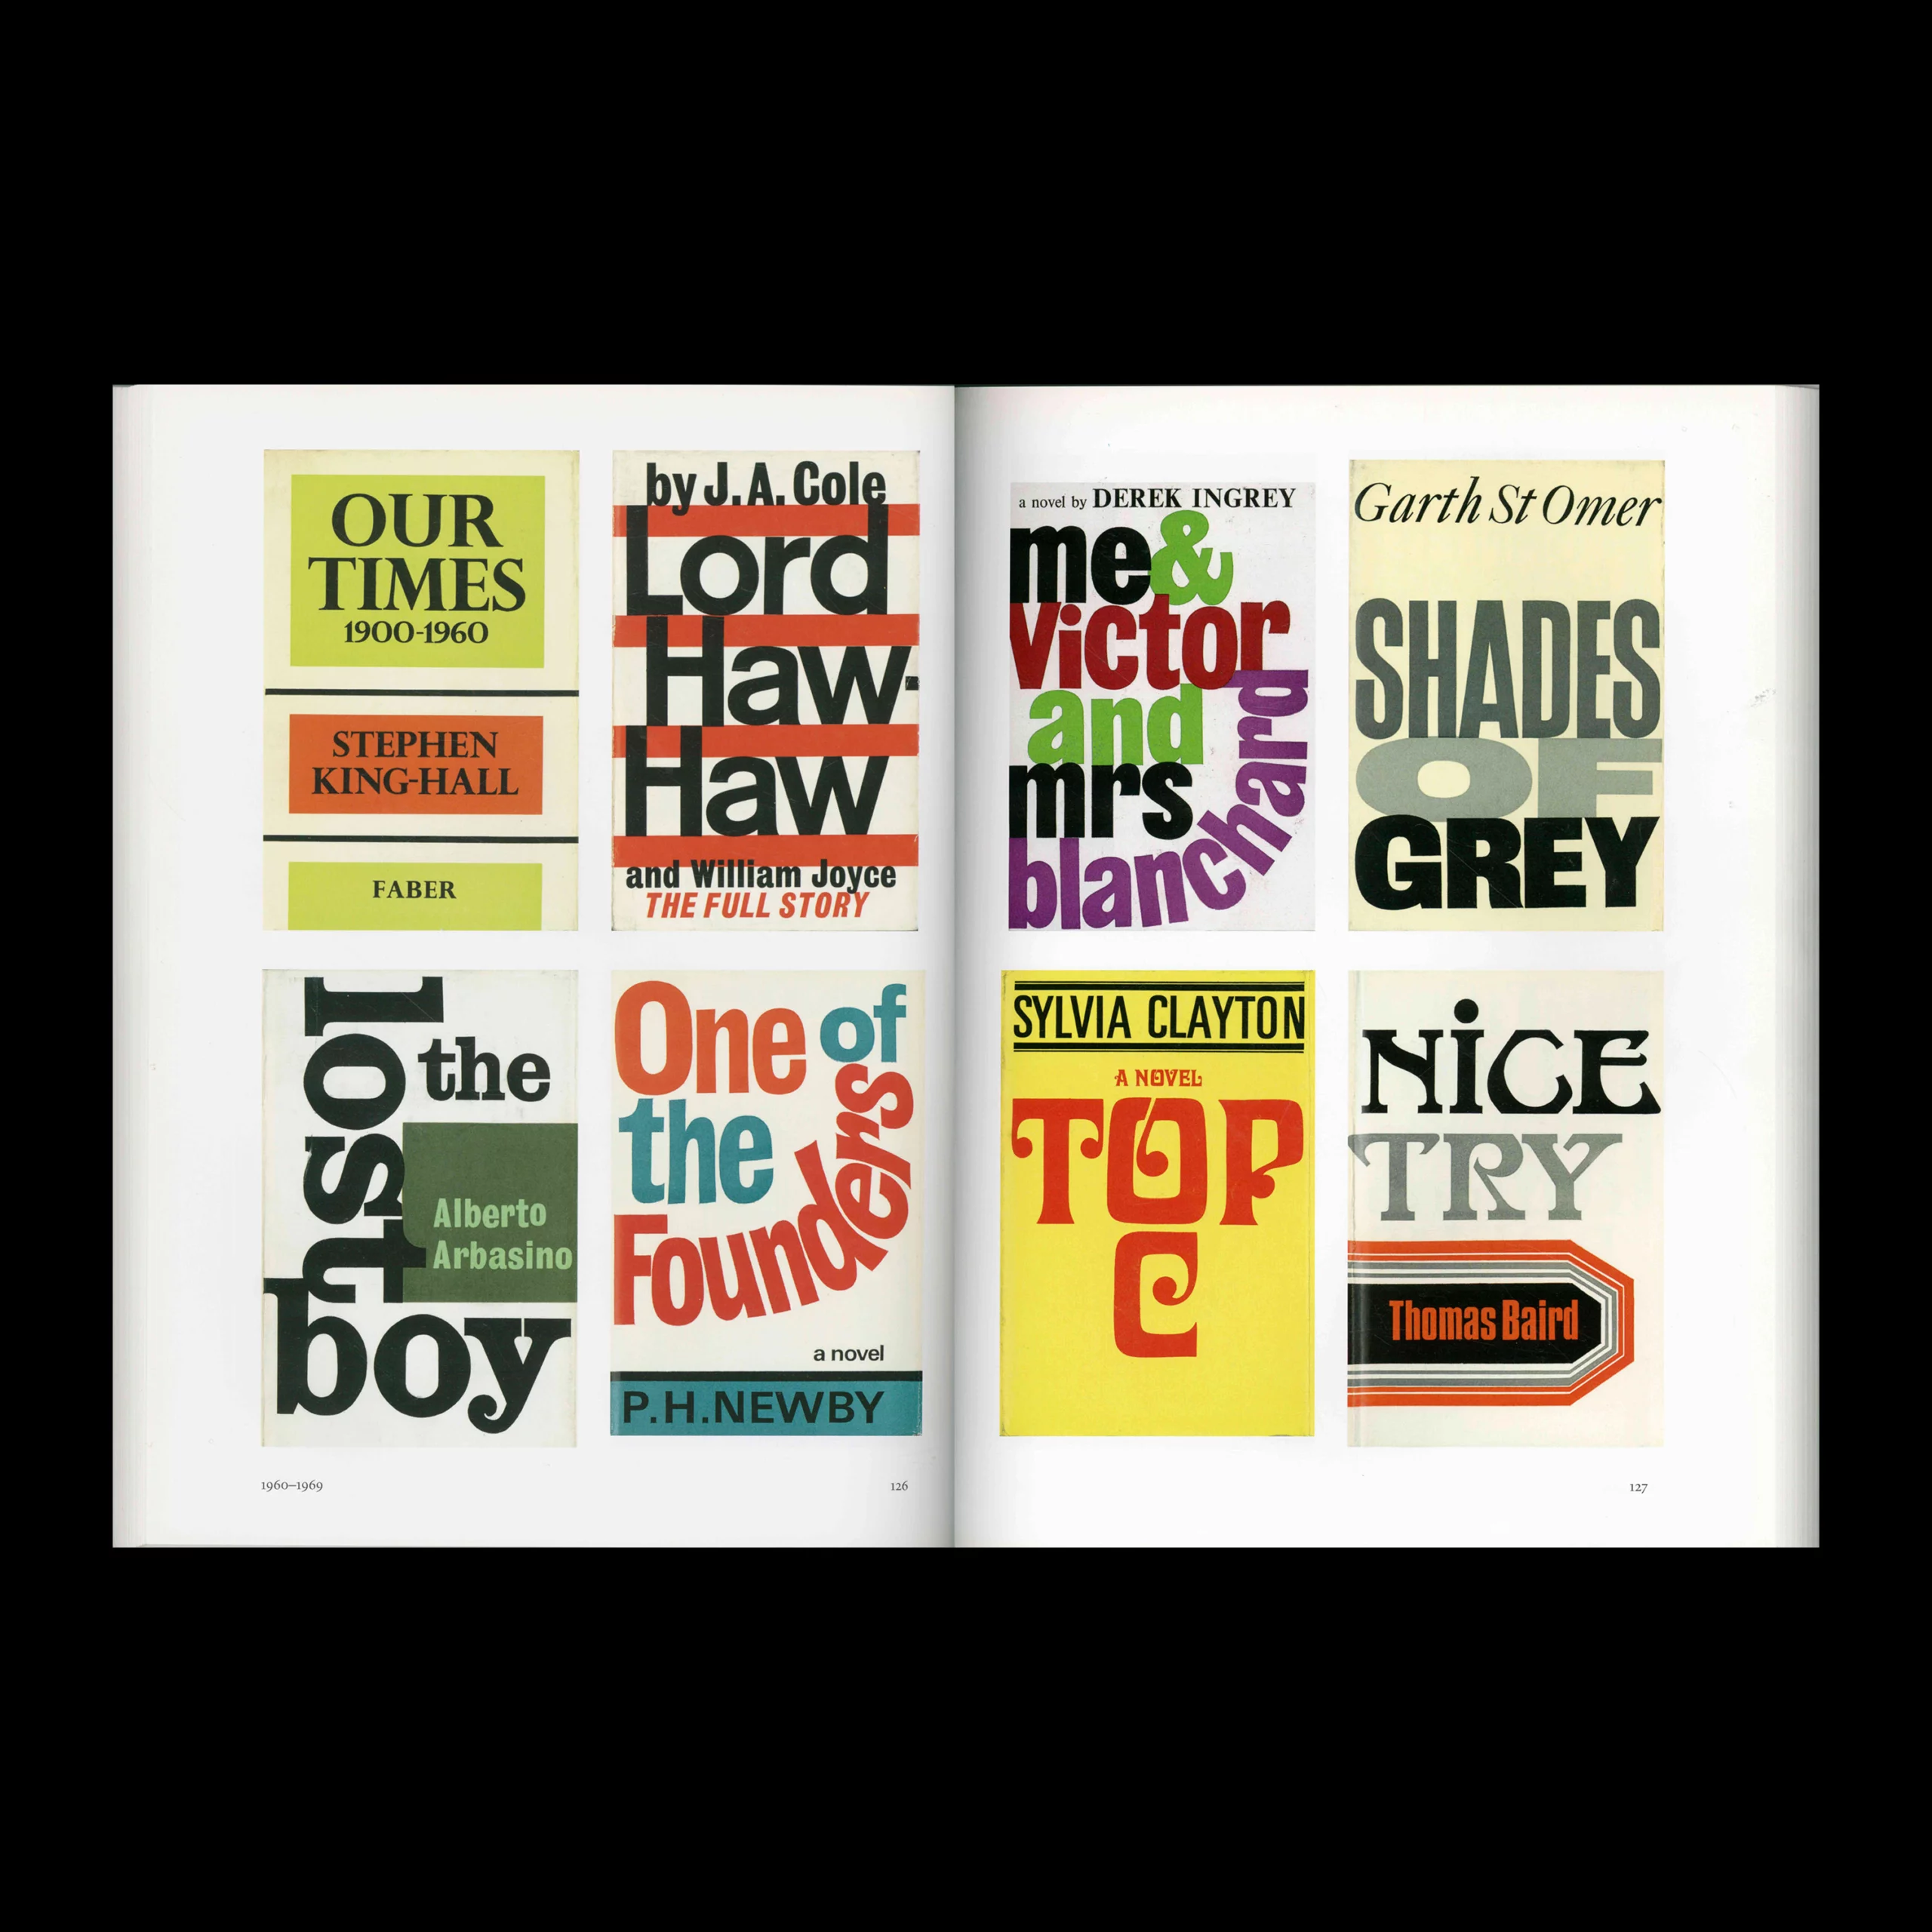 Faber and Faber - Eighty Years of Book Cover Design, Joseph Connolly, 2009